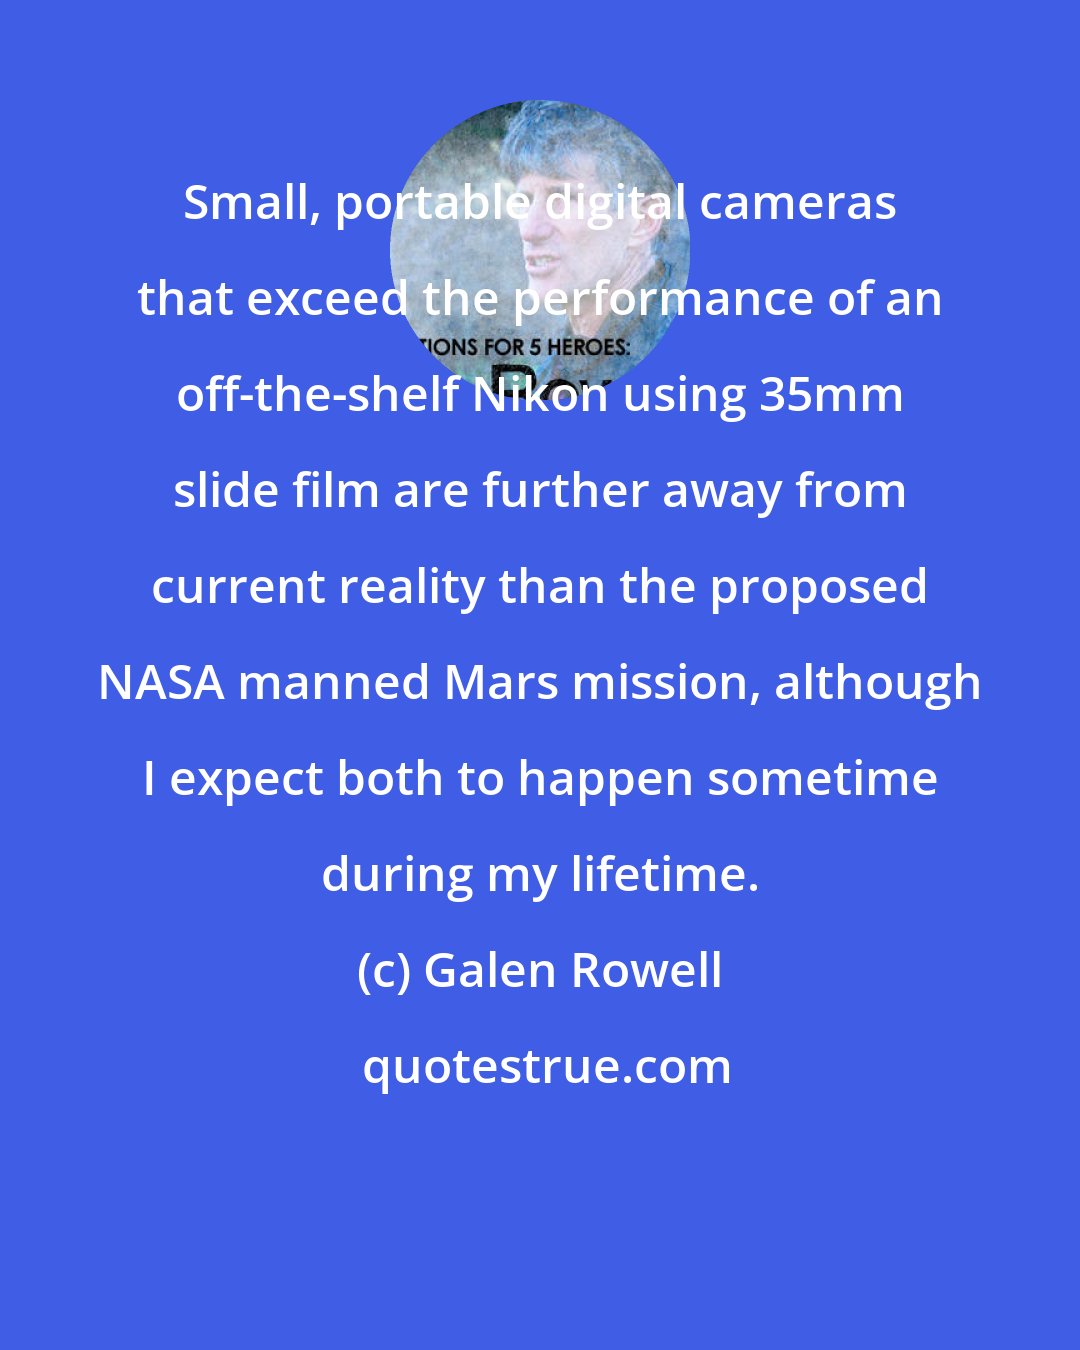 Galen Rowell: Small, portable digital cameras that exceed the performance of an off-the-shelf Nikon using 35mm slide film are further away from current reality than the proposed NASA manned Mars mission, although I expect both to happen sometime during my lifetime.